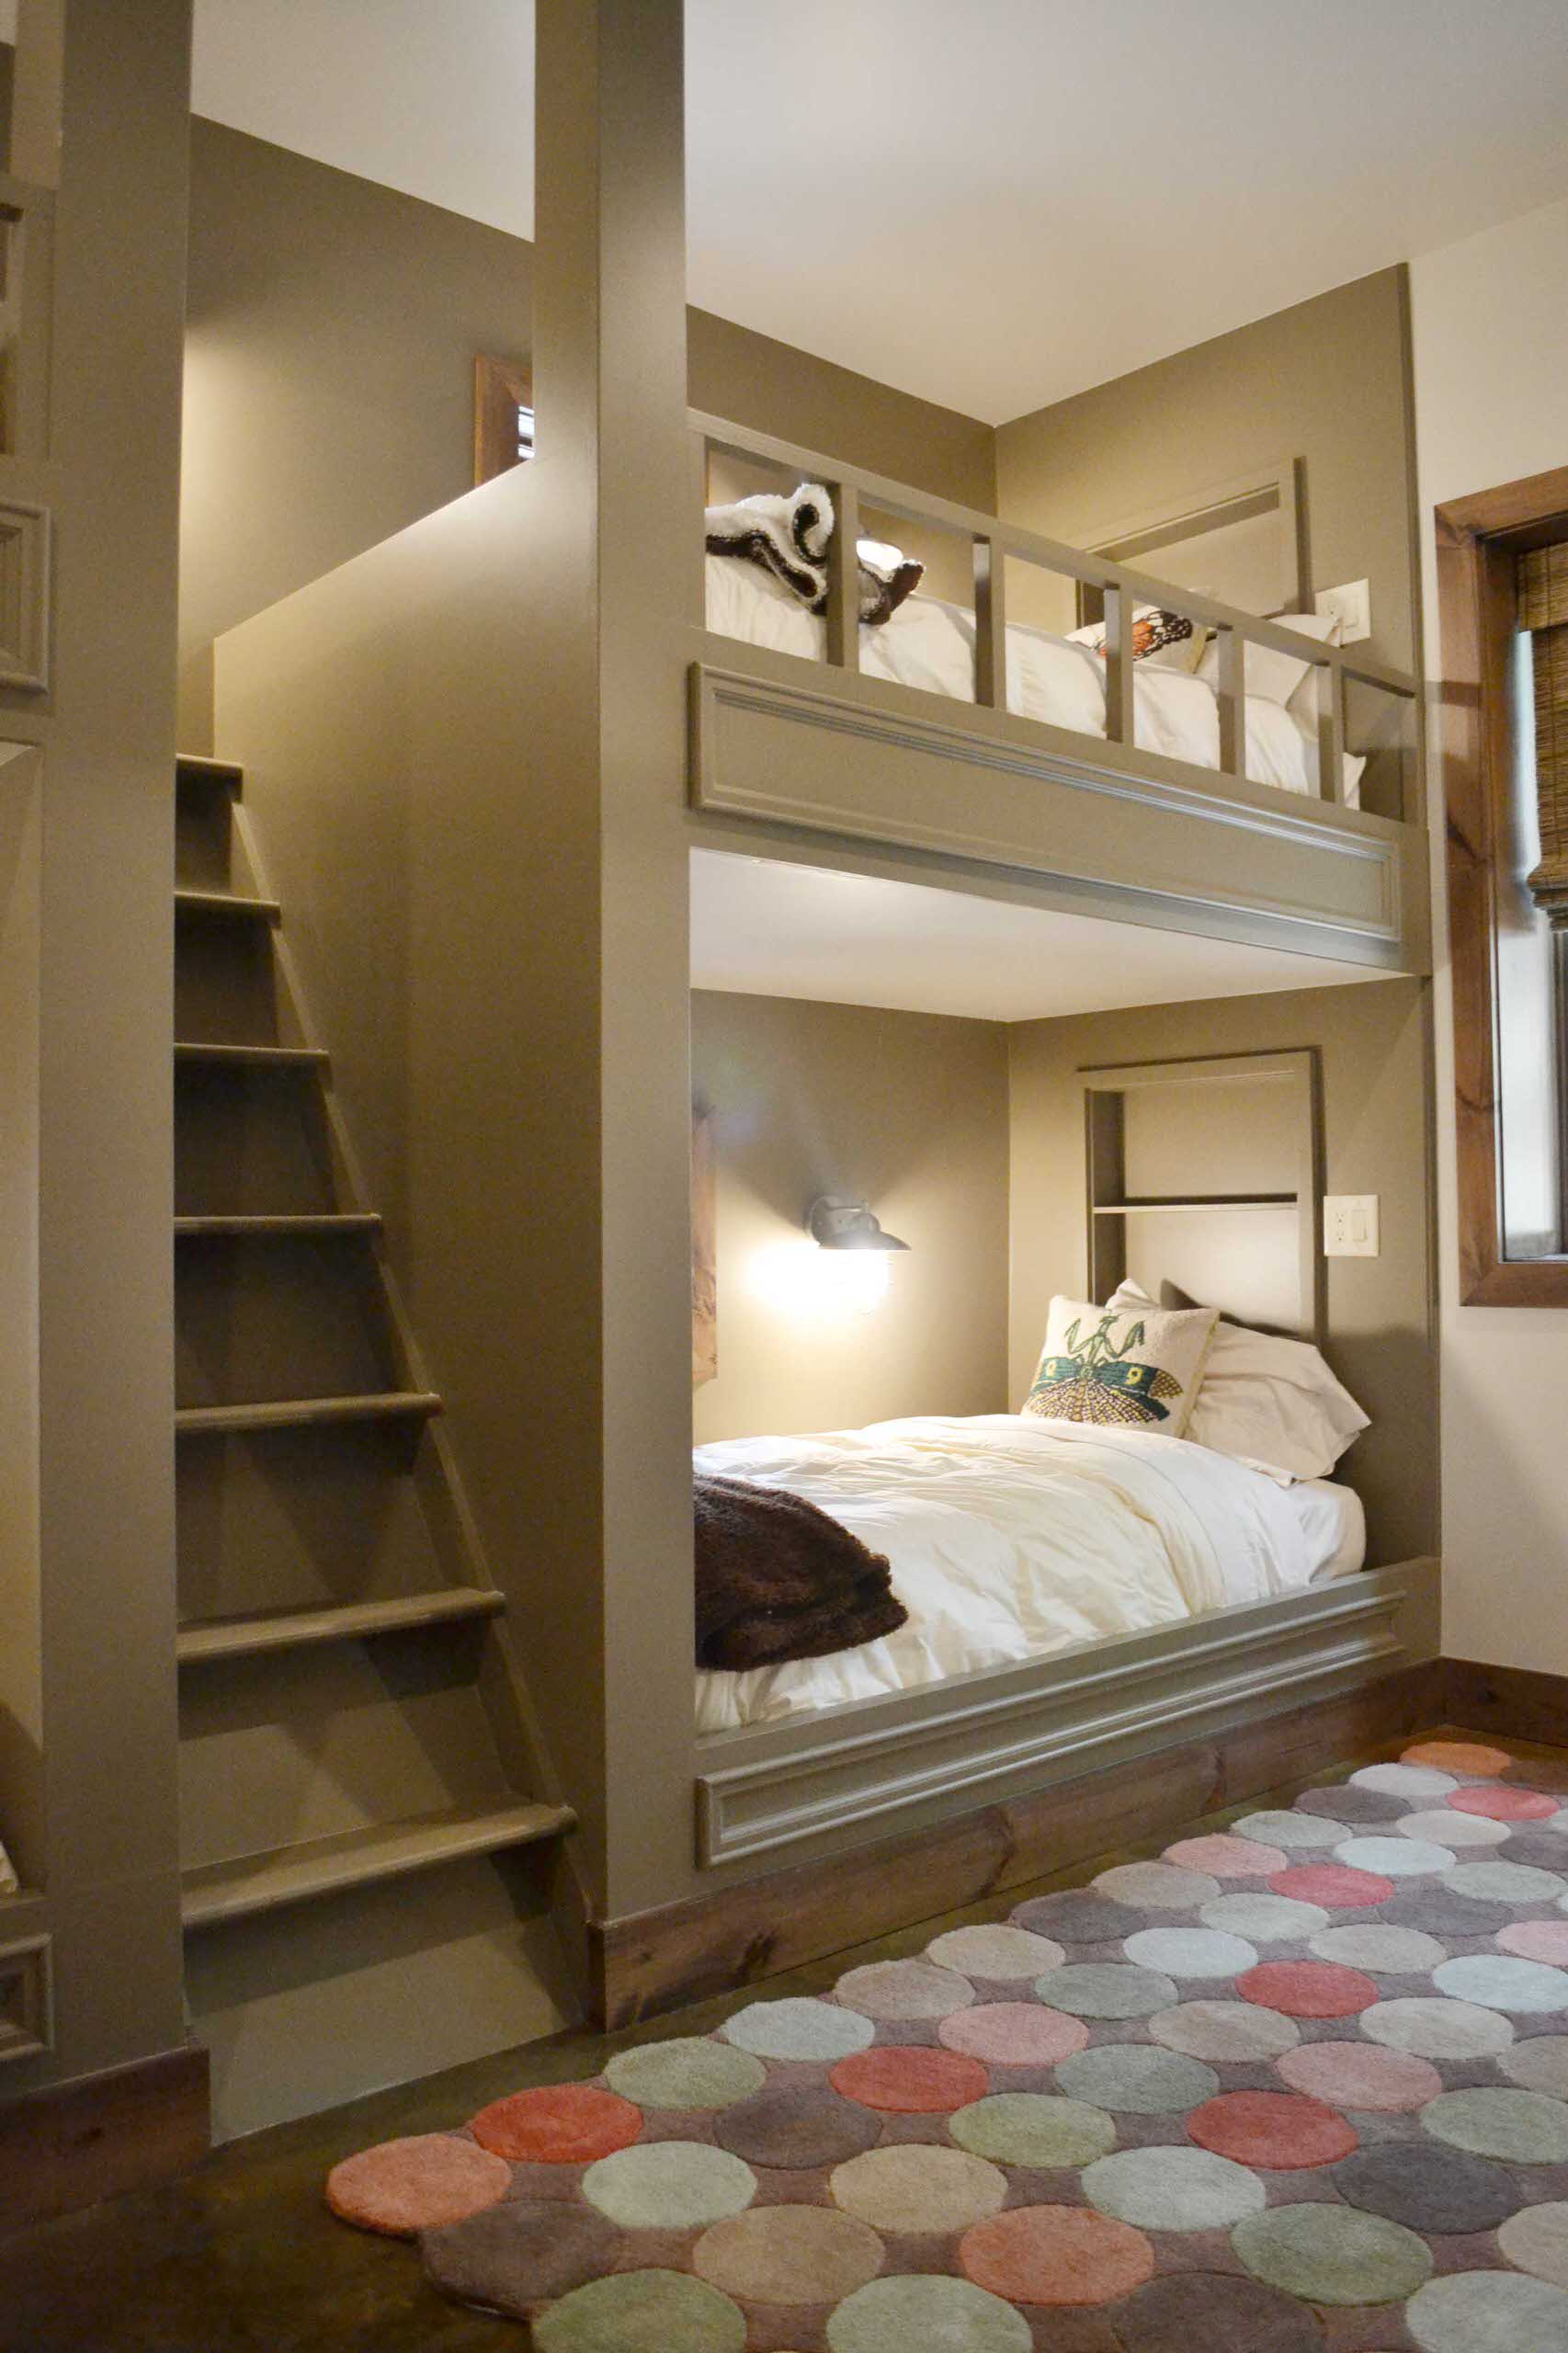 Built In Bunk Bed Stairs Houzz, How To Build Built In Bunk Beds With Stairs